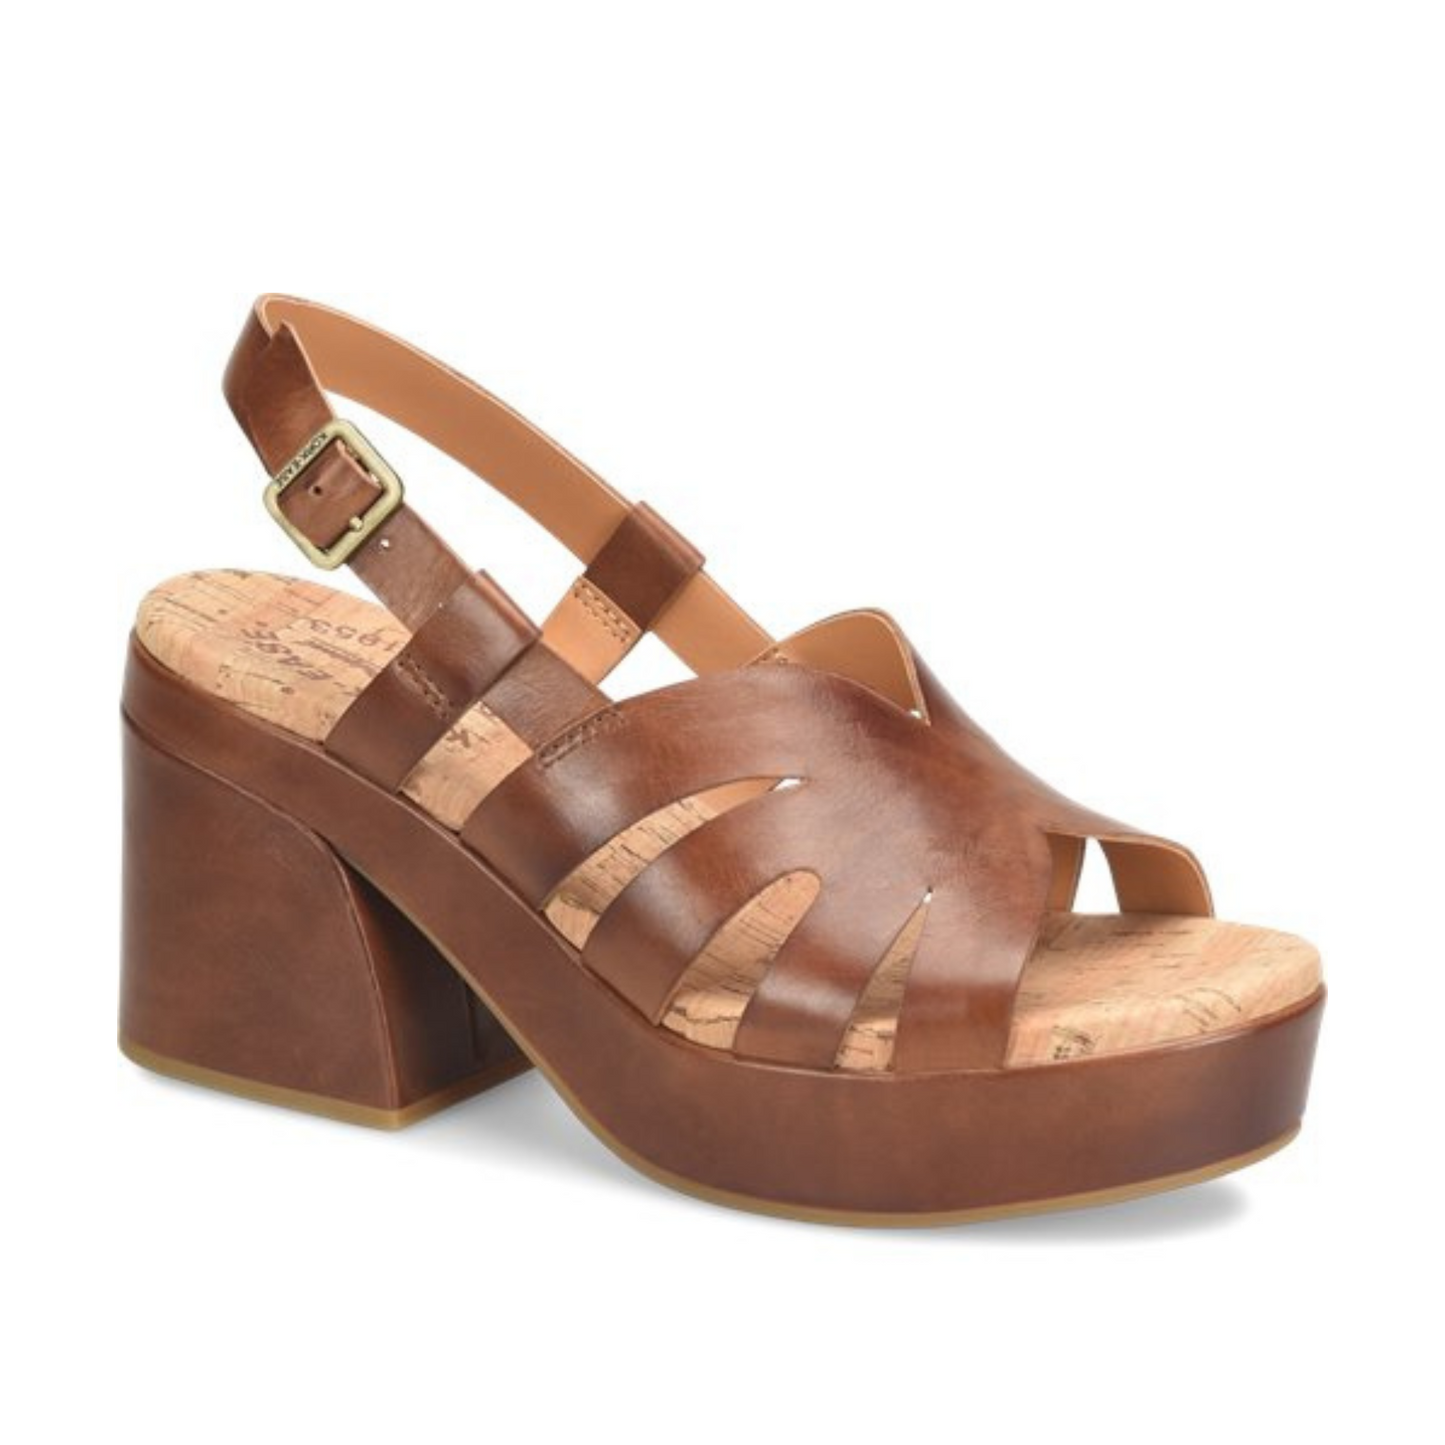 The Kork-Ease Paschal Slingback Sandal in Brown Leather